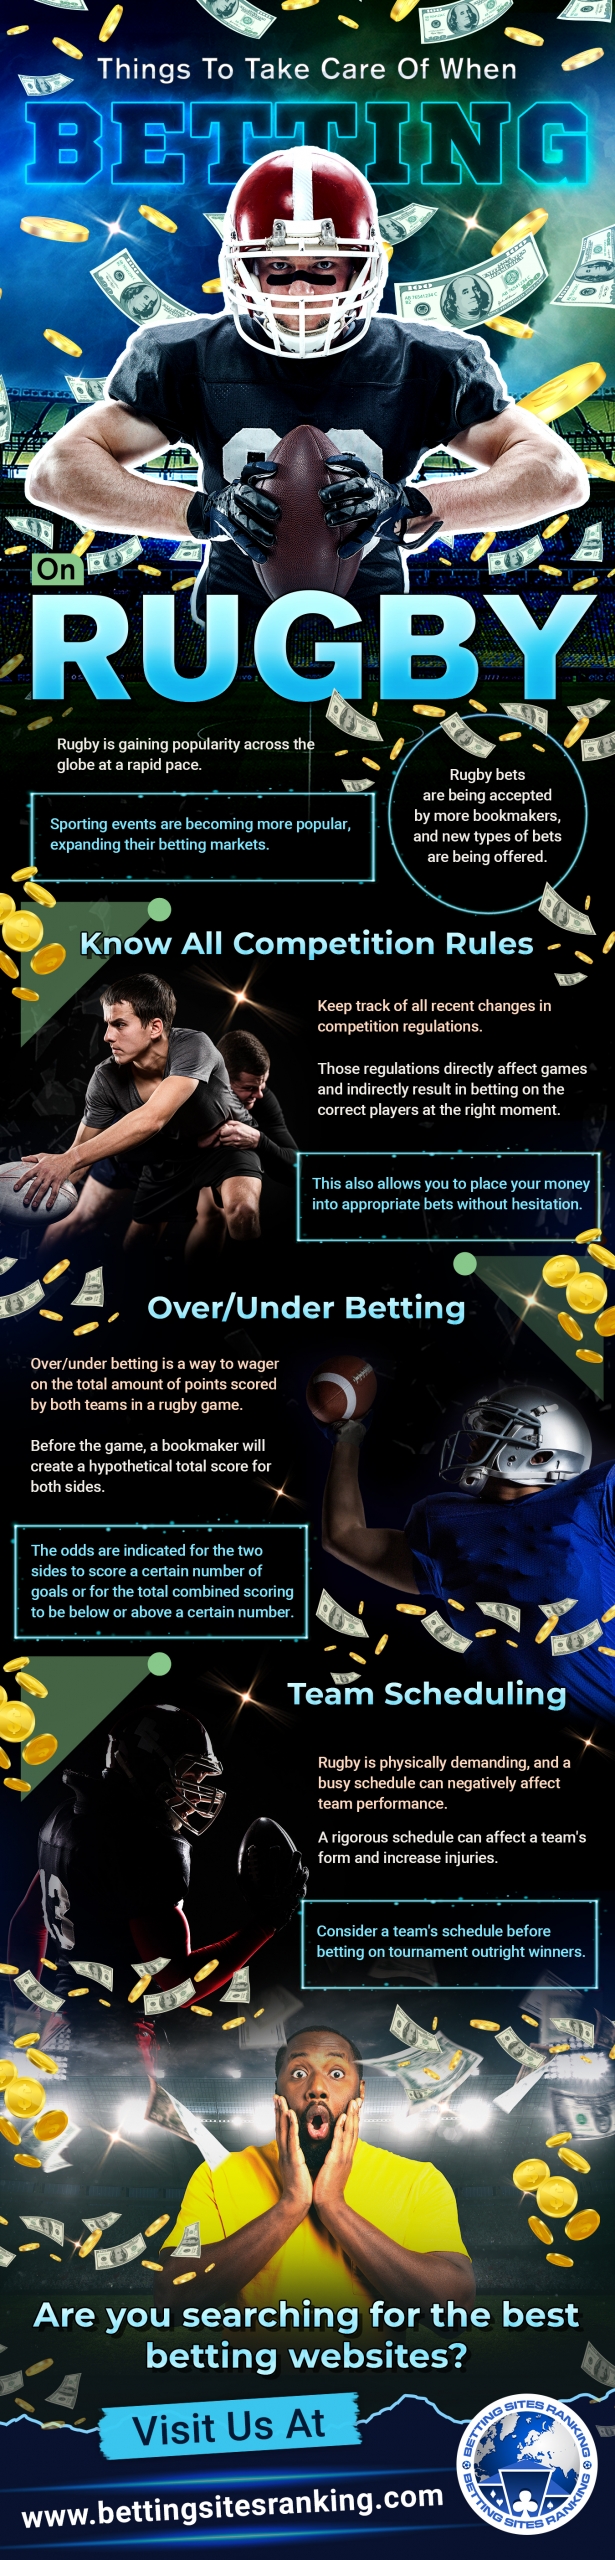 Things-To-Take-Care-Of-When-Betting-On-Rugby